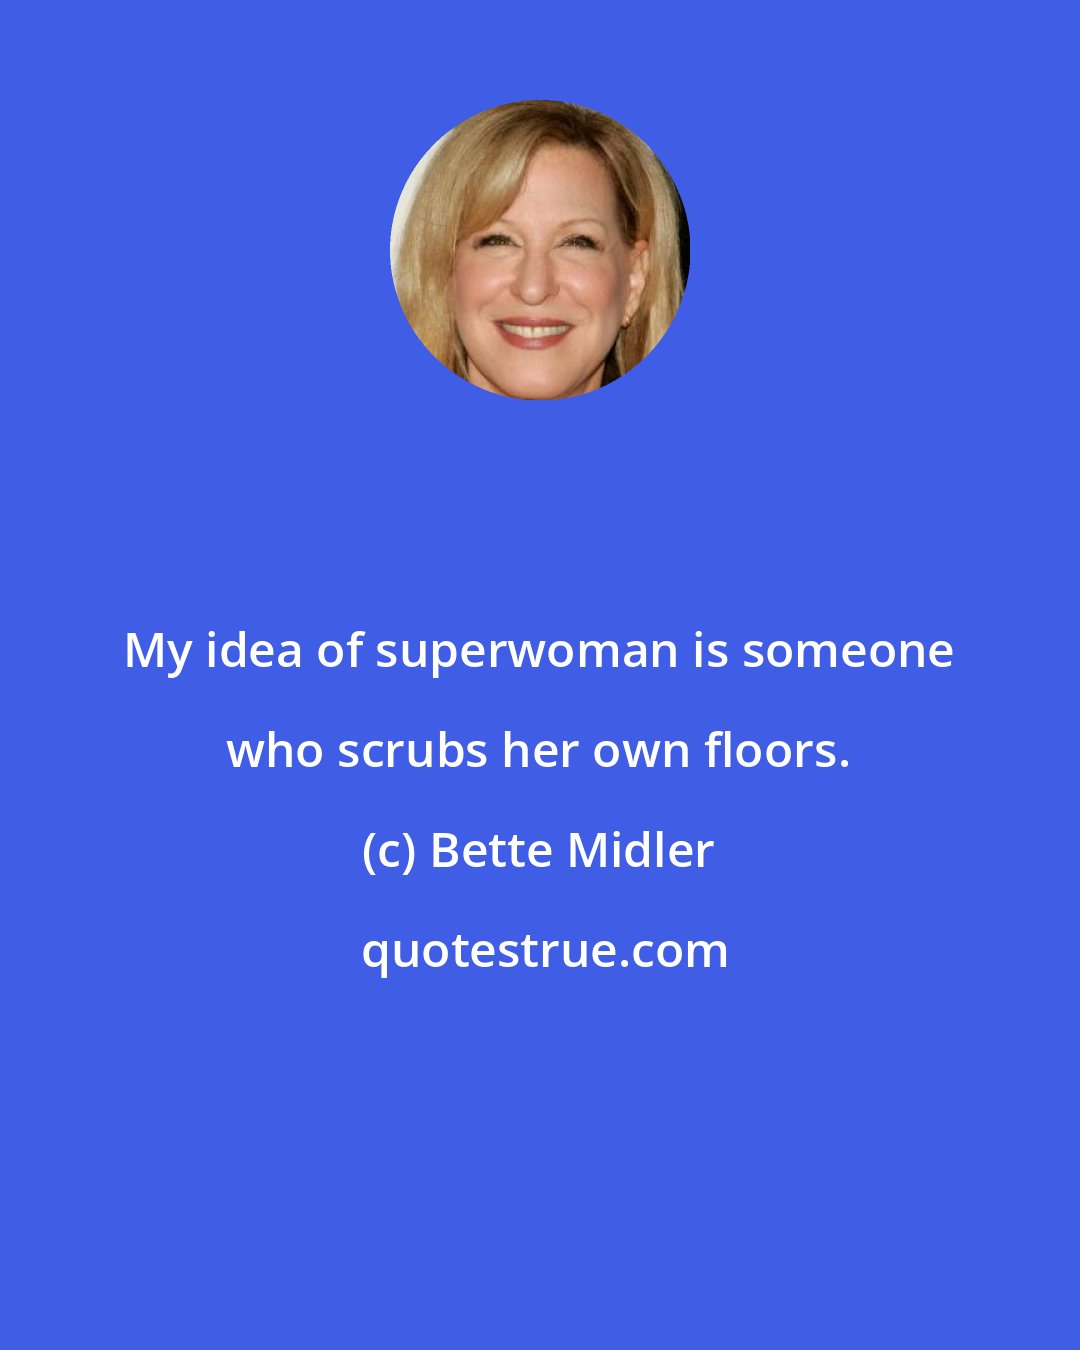 Bette Midler: My idea of superwoman is someone who scrubs her own floors.